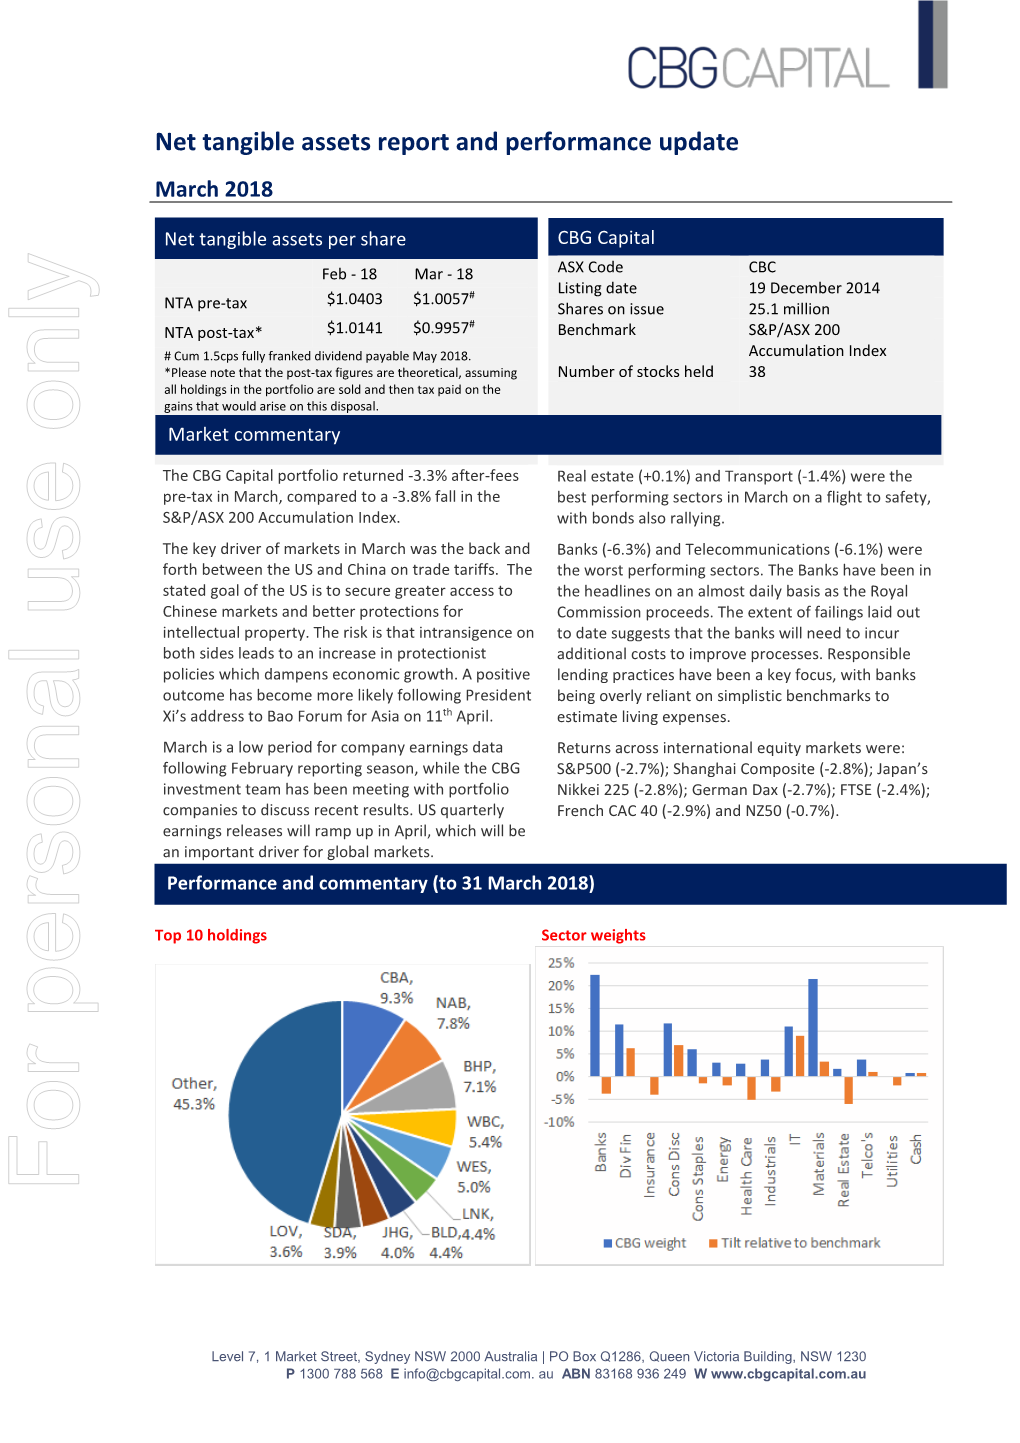 Net Tangible Assets Report and Performance Update March 2018